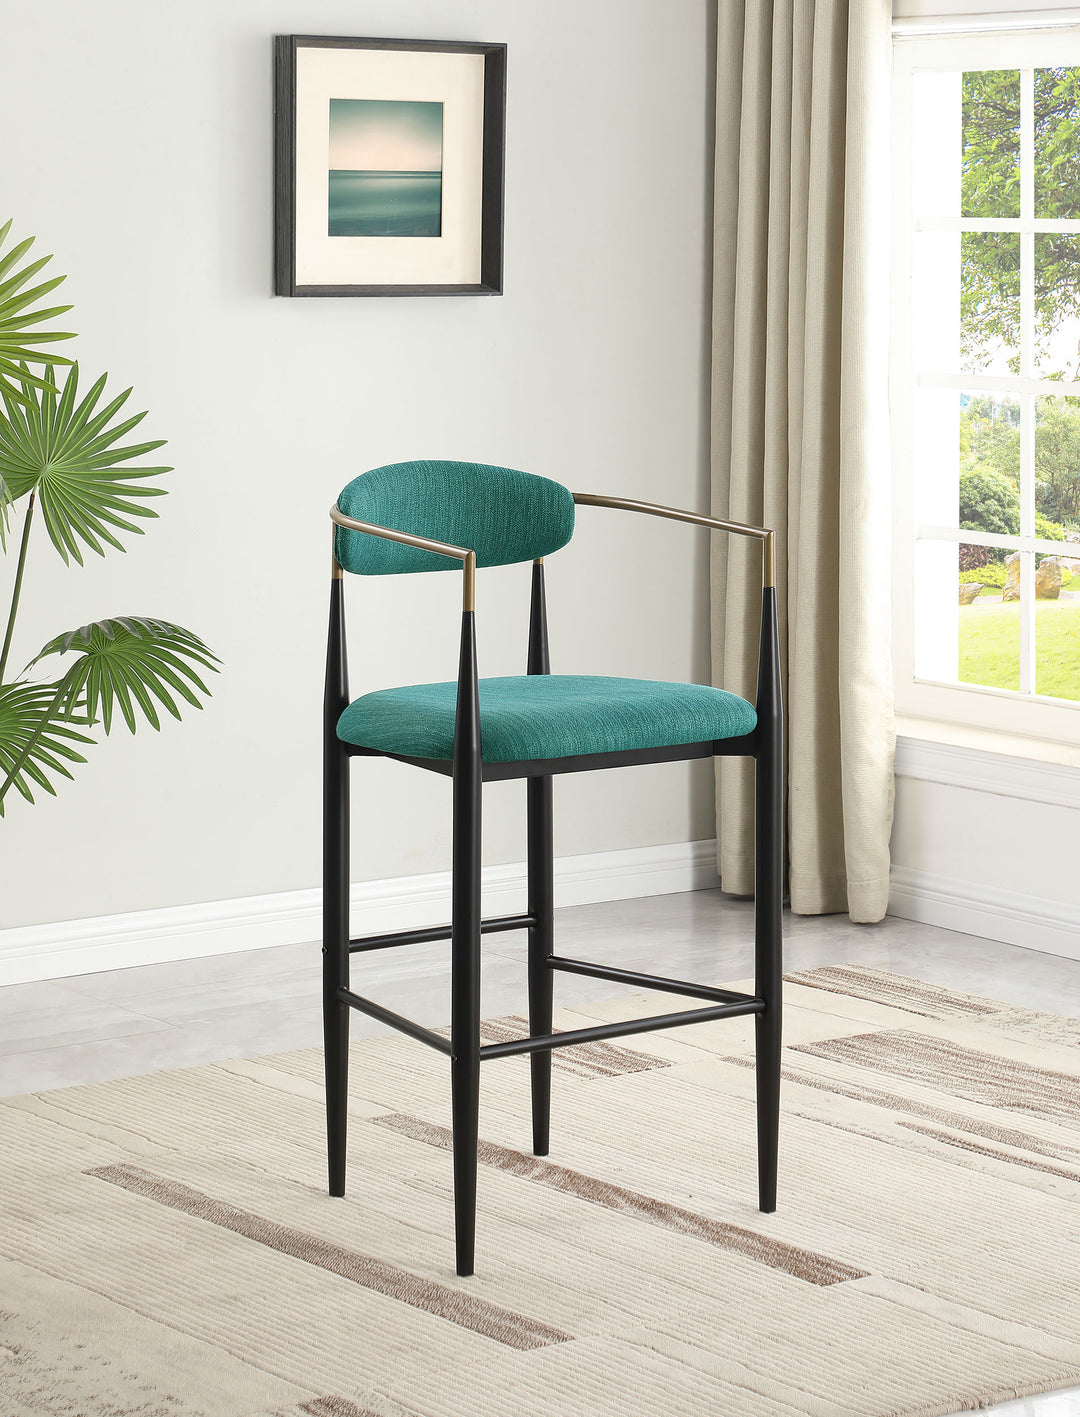 Tina Metal Pub Height Bar Stool with Upholstered Back and Seat Green (Set of 2)_1